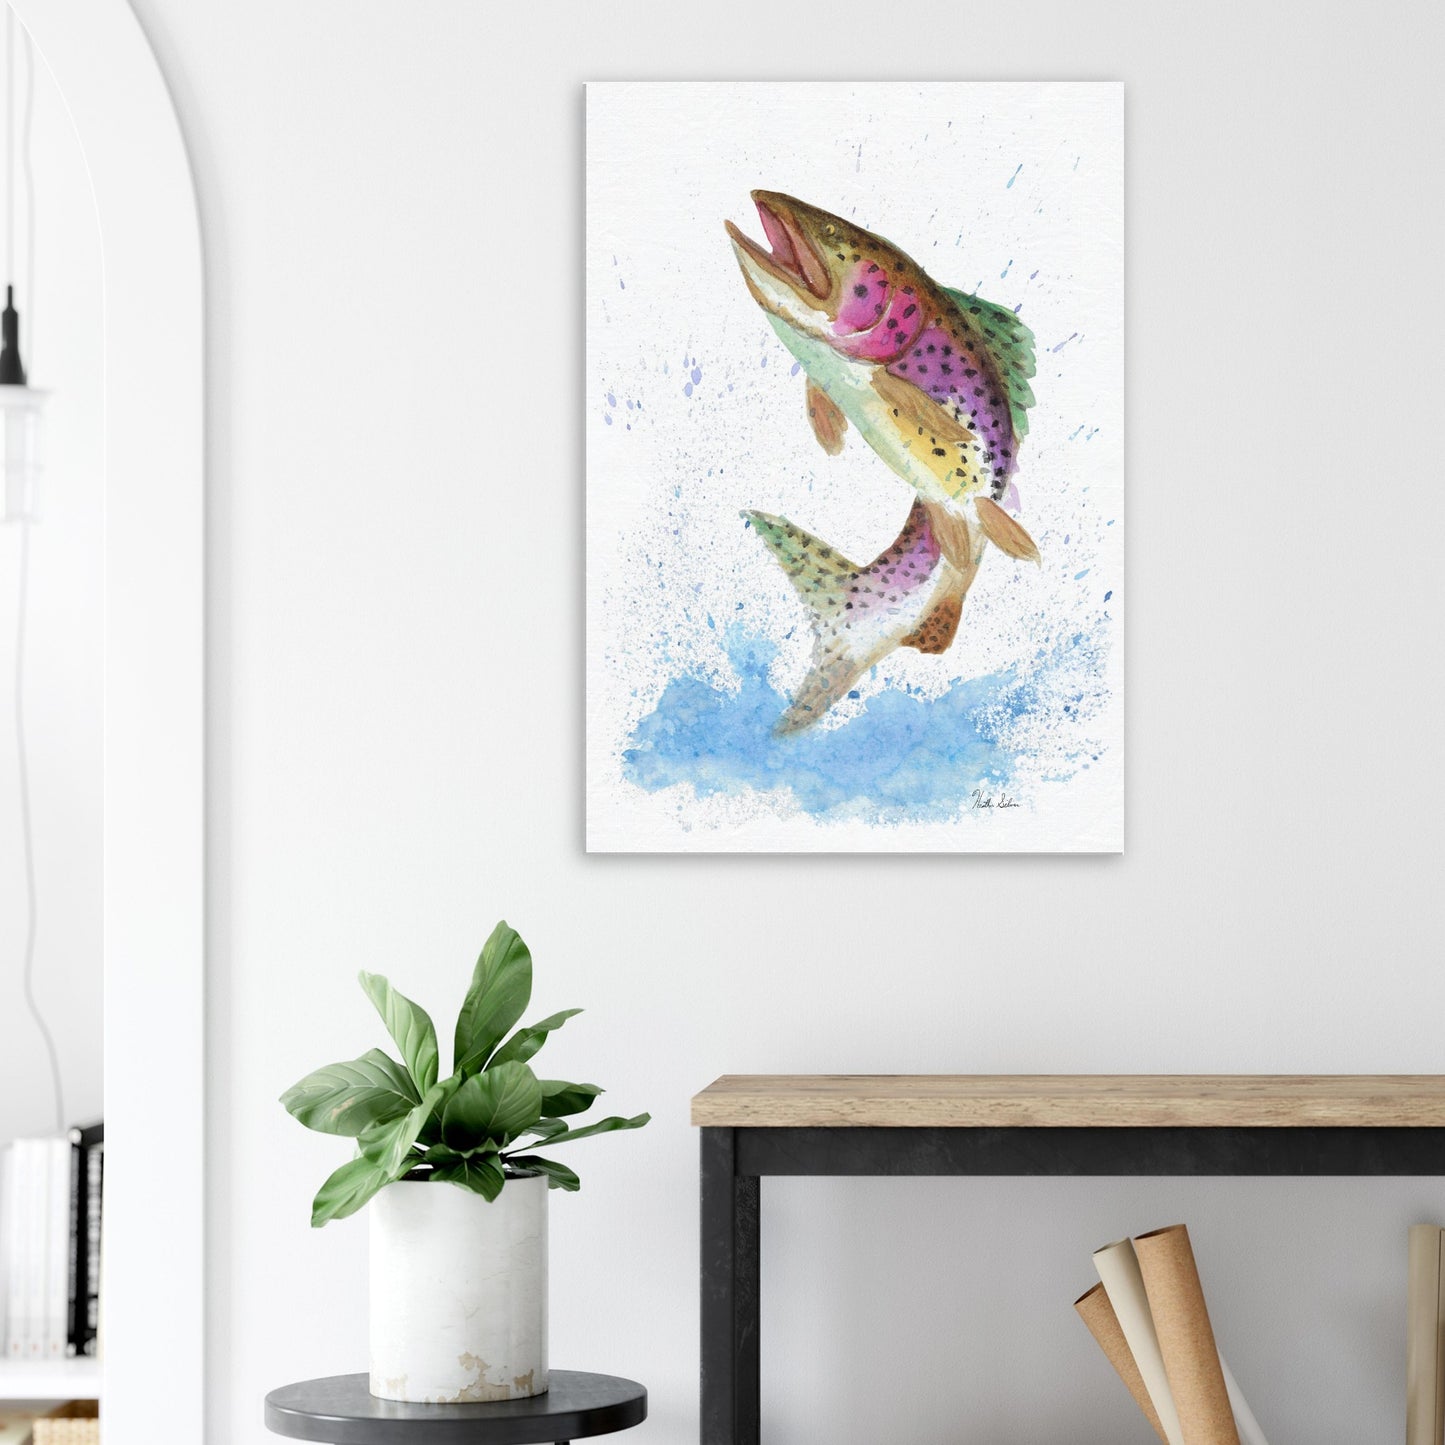 28 by 40 inch slim canvas wall art print featuring a watercolor painting of a rainbow trout leaping from the water. Shown on wall above wooden end table and potted plant.